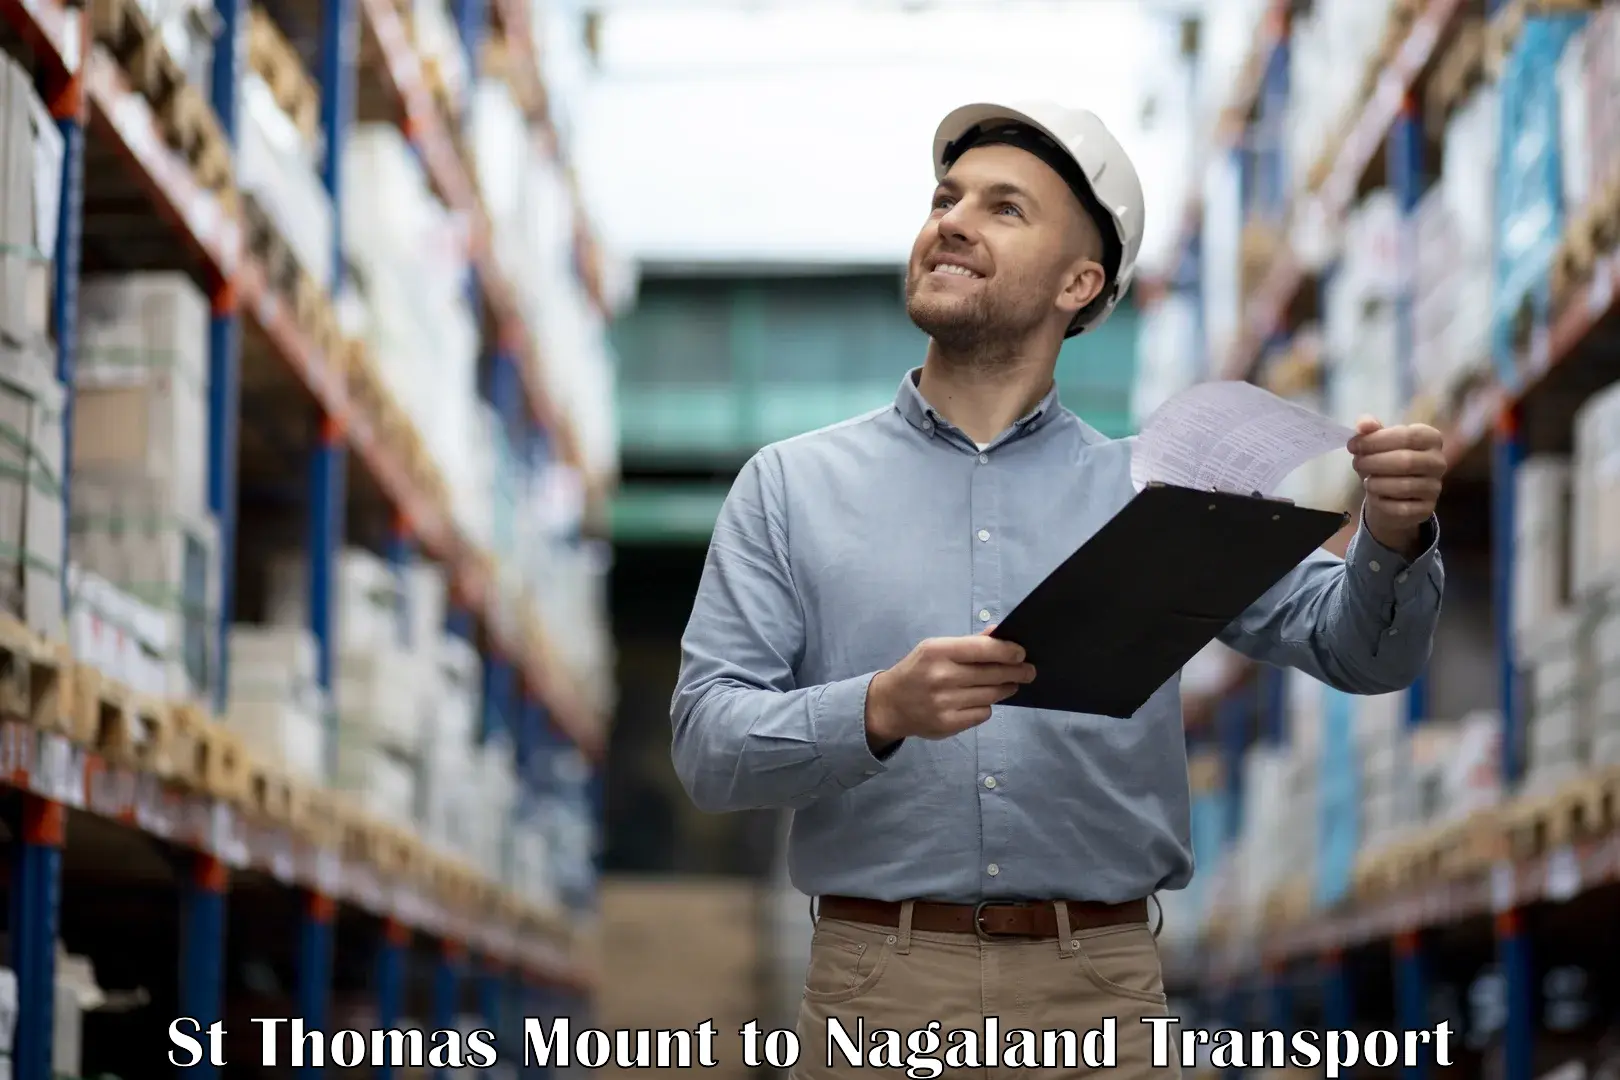 Nationwide transport services St Thomas Mount to Nagaland